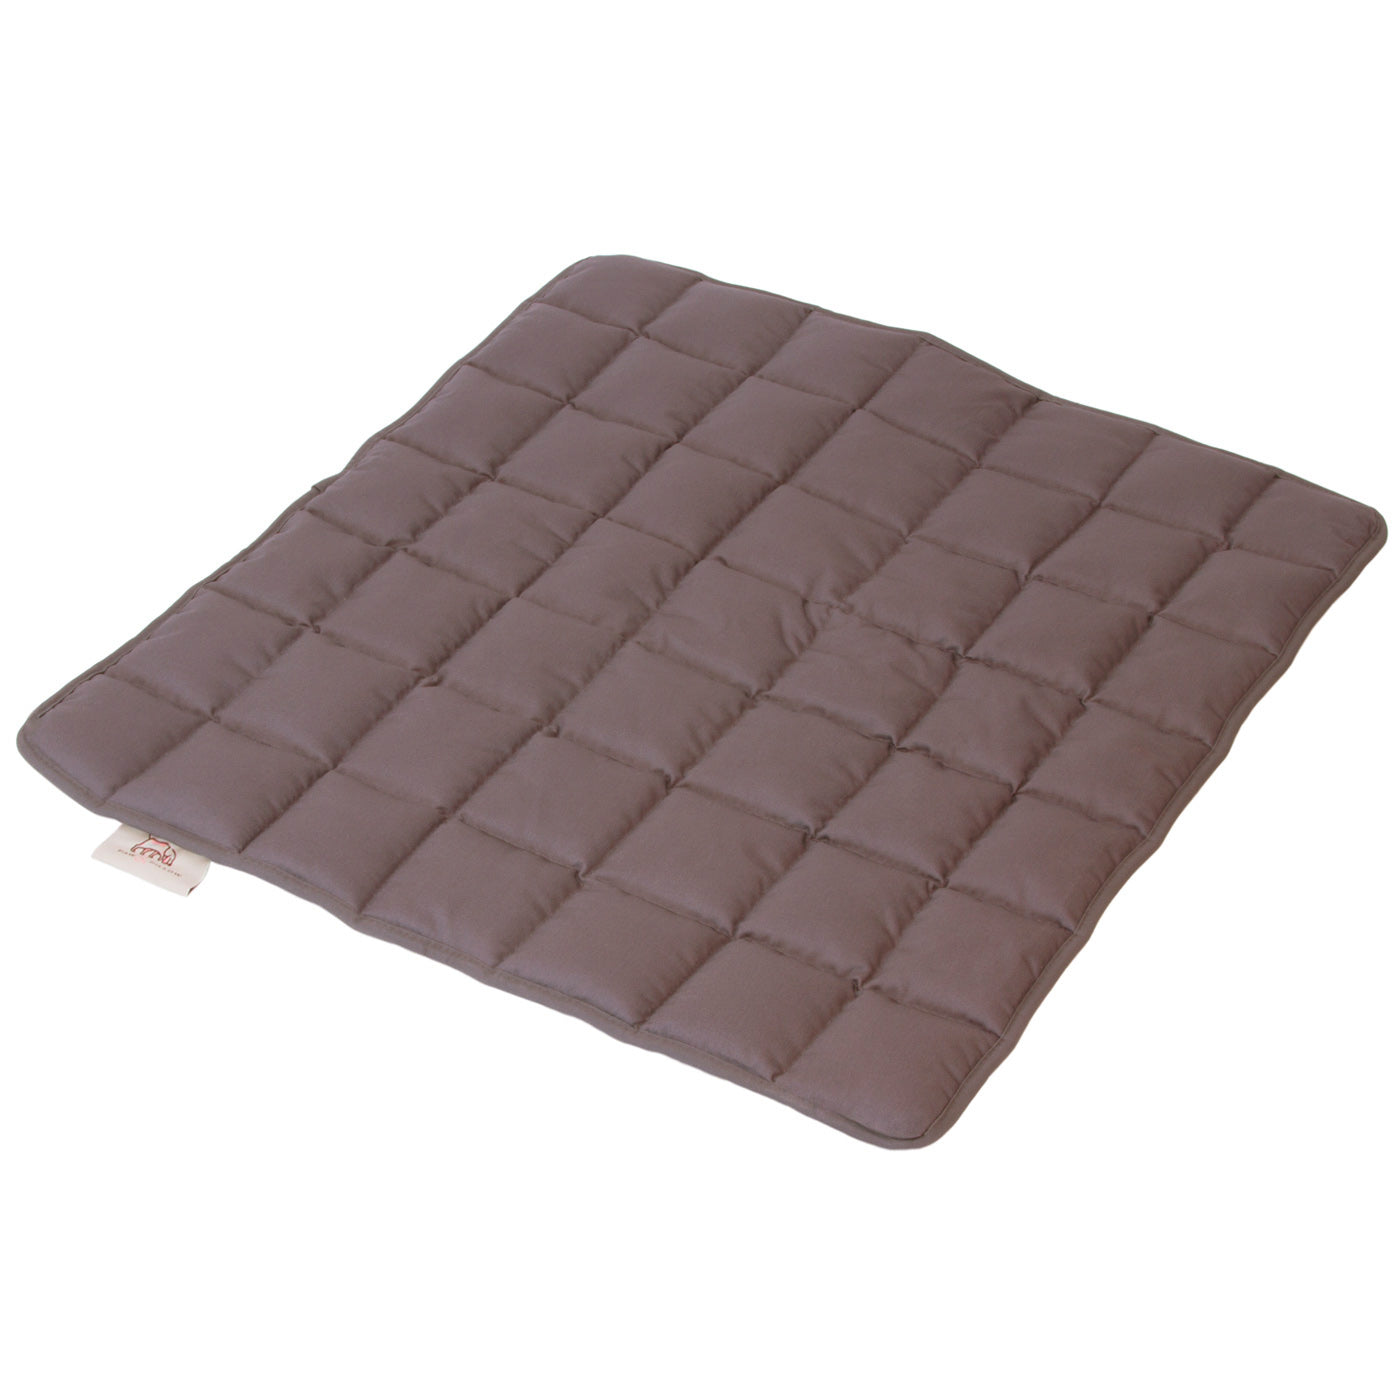 Paw & Pillow Hundedecke - Robustes Hund & #farbe_taupe